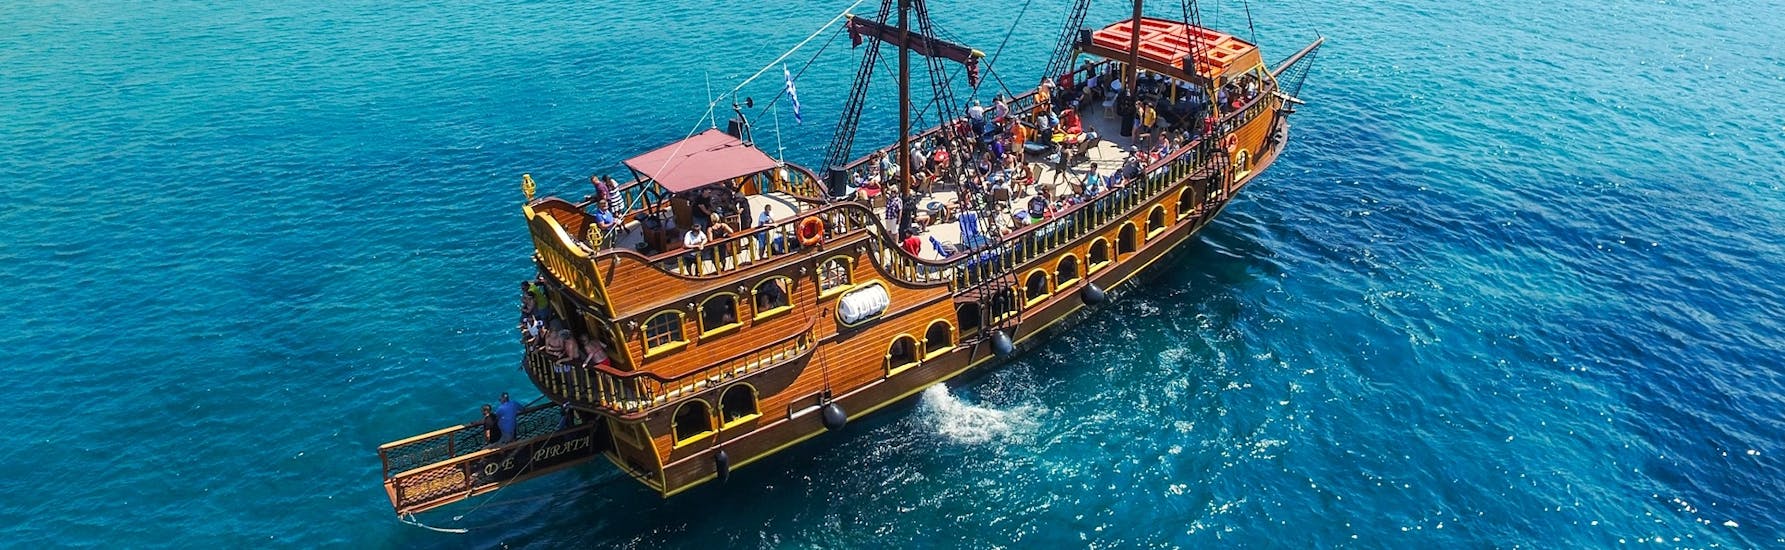 A group of participants enjoying an exciting pirate boat trip taking them to Kalymnos, Pserimos and Plati with lunch with Barco de Pirata.